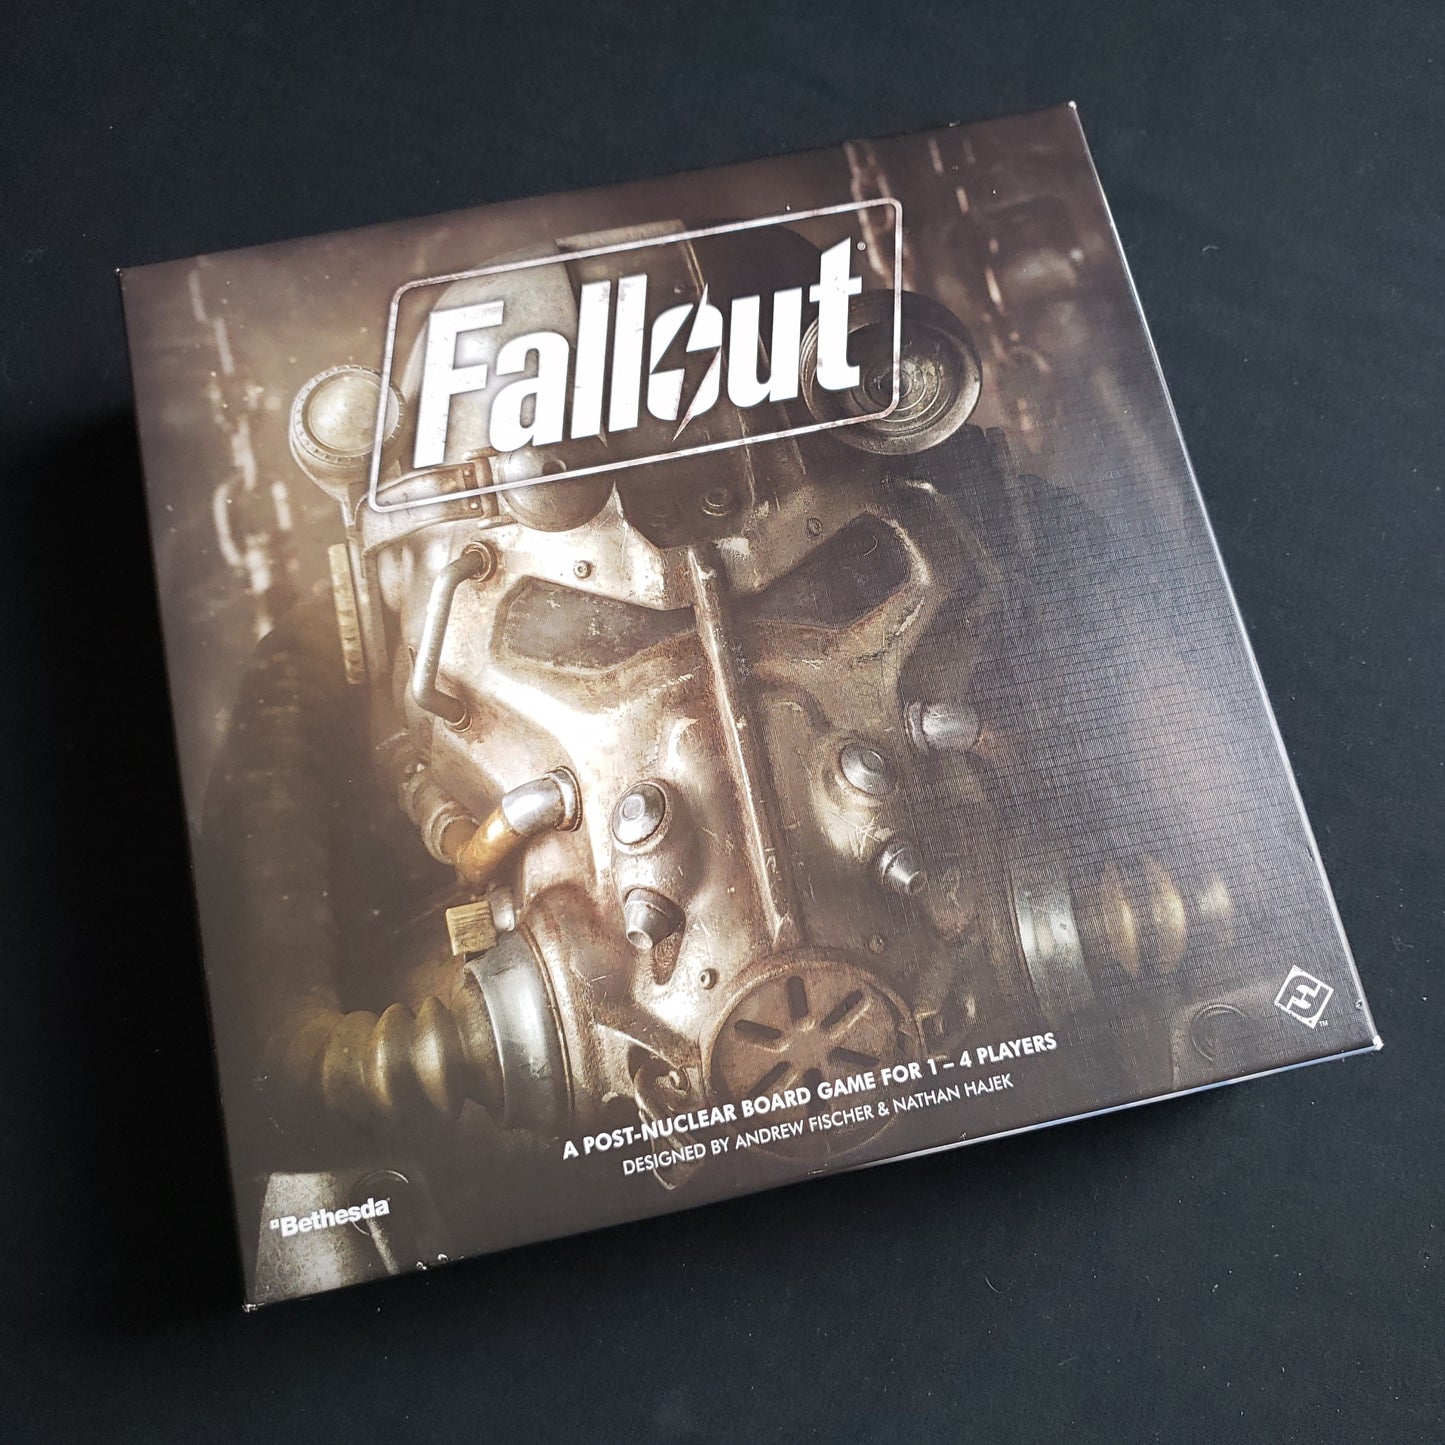 Image shows the front cover of the box of the Fallout board game